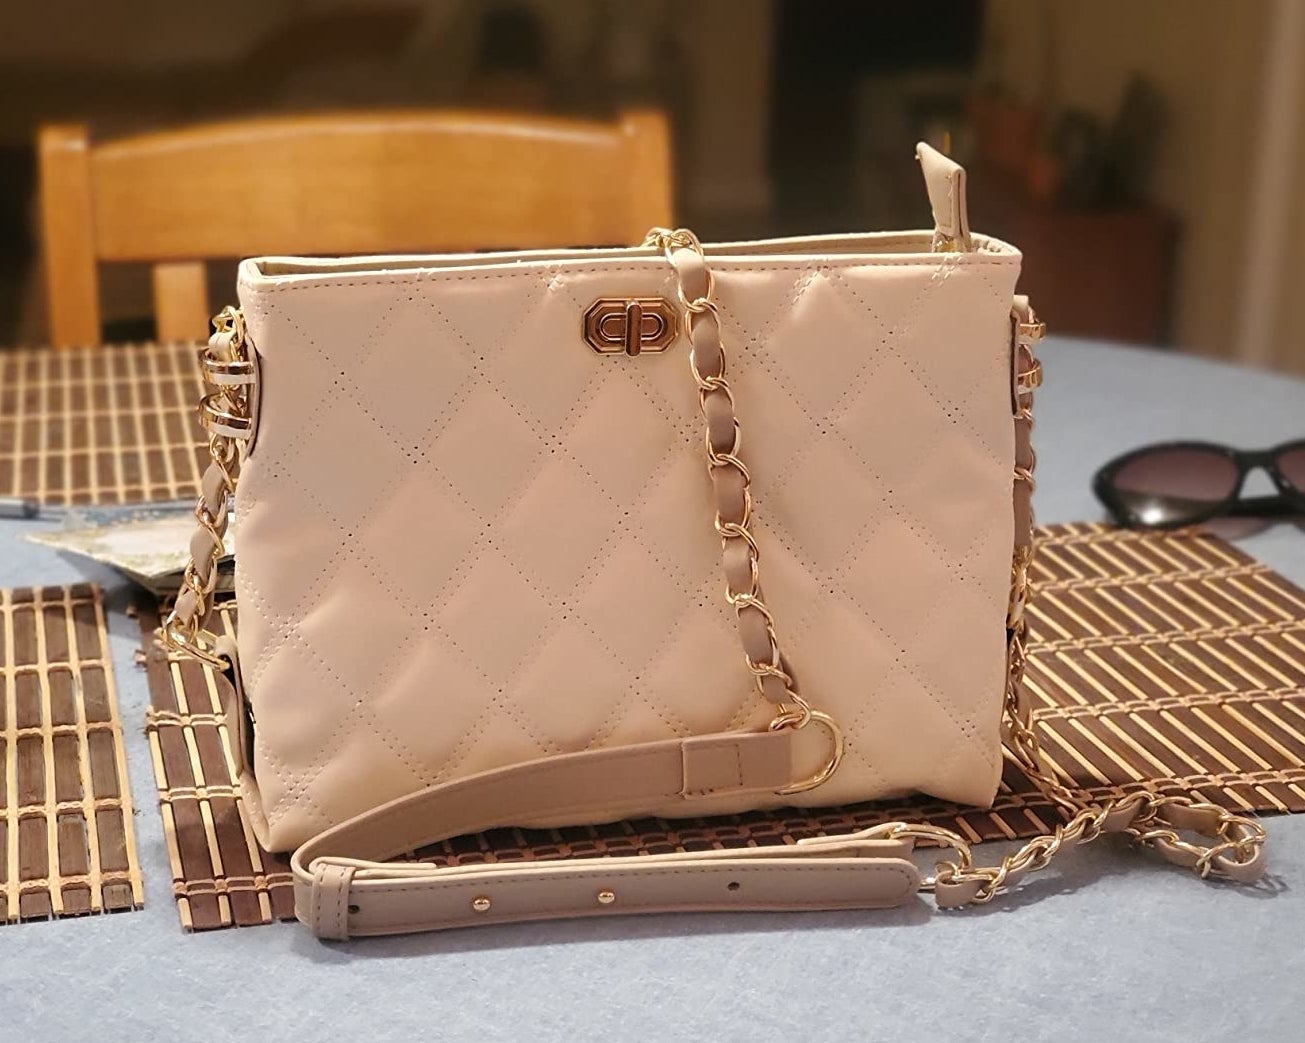 Reviewer photo of the tufted leather bag in a cream color